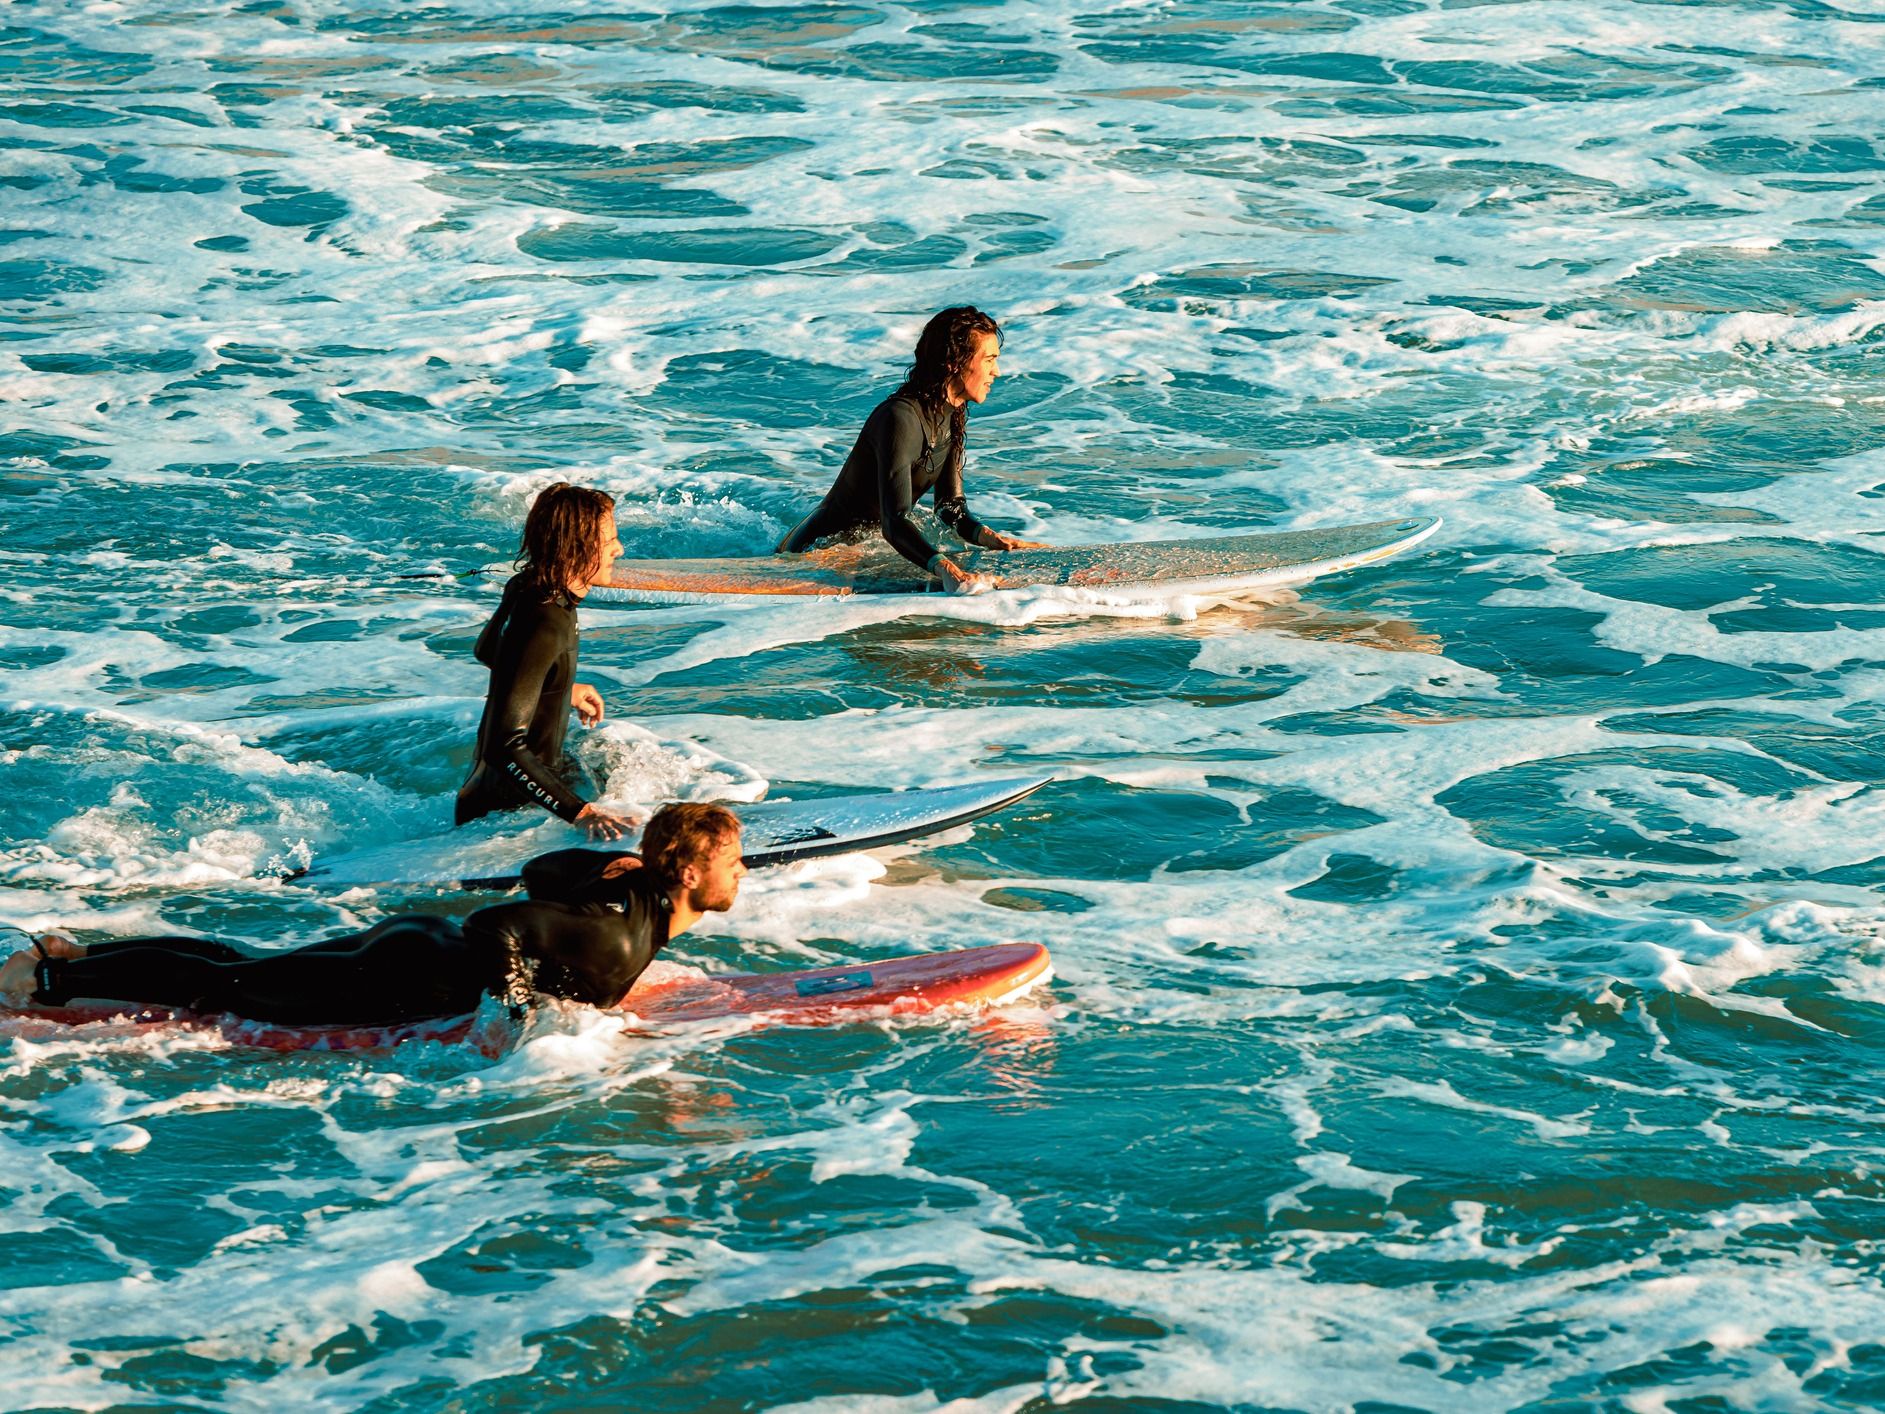 Surfers wait for a wave together.